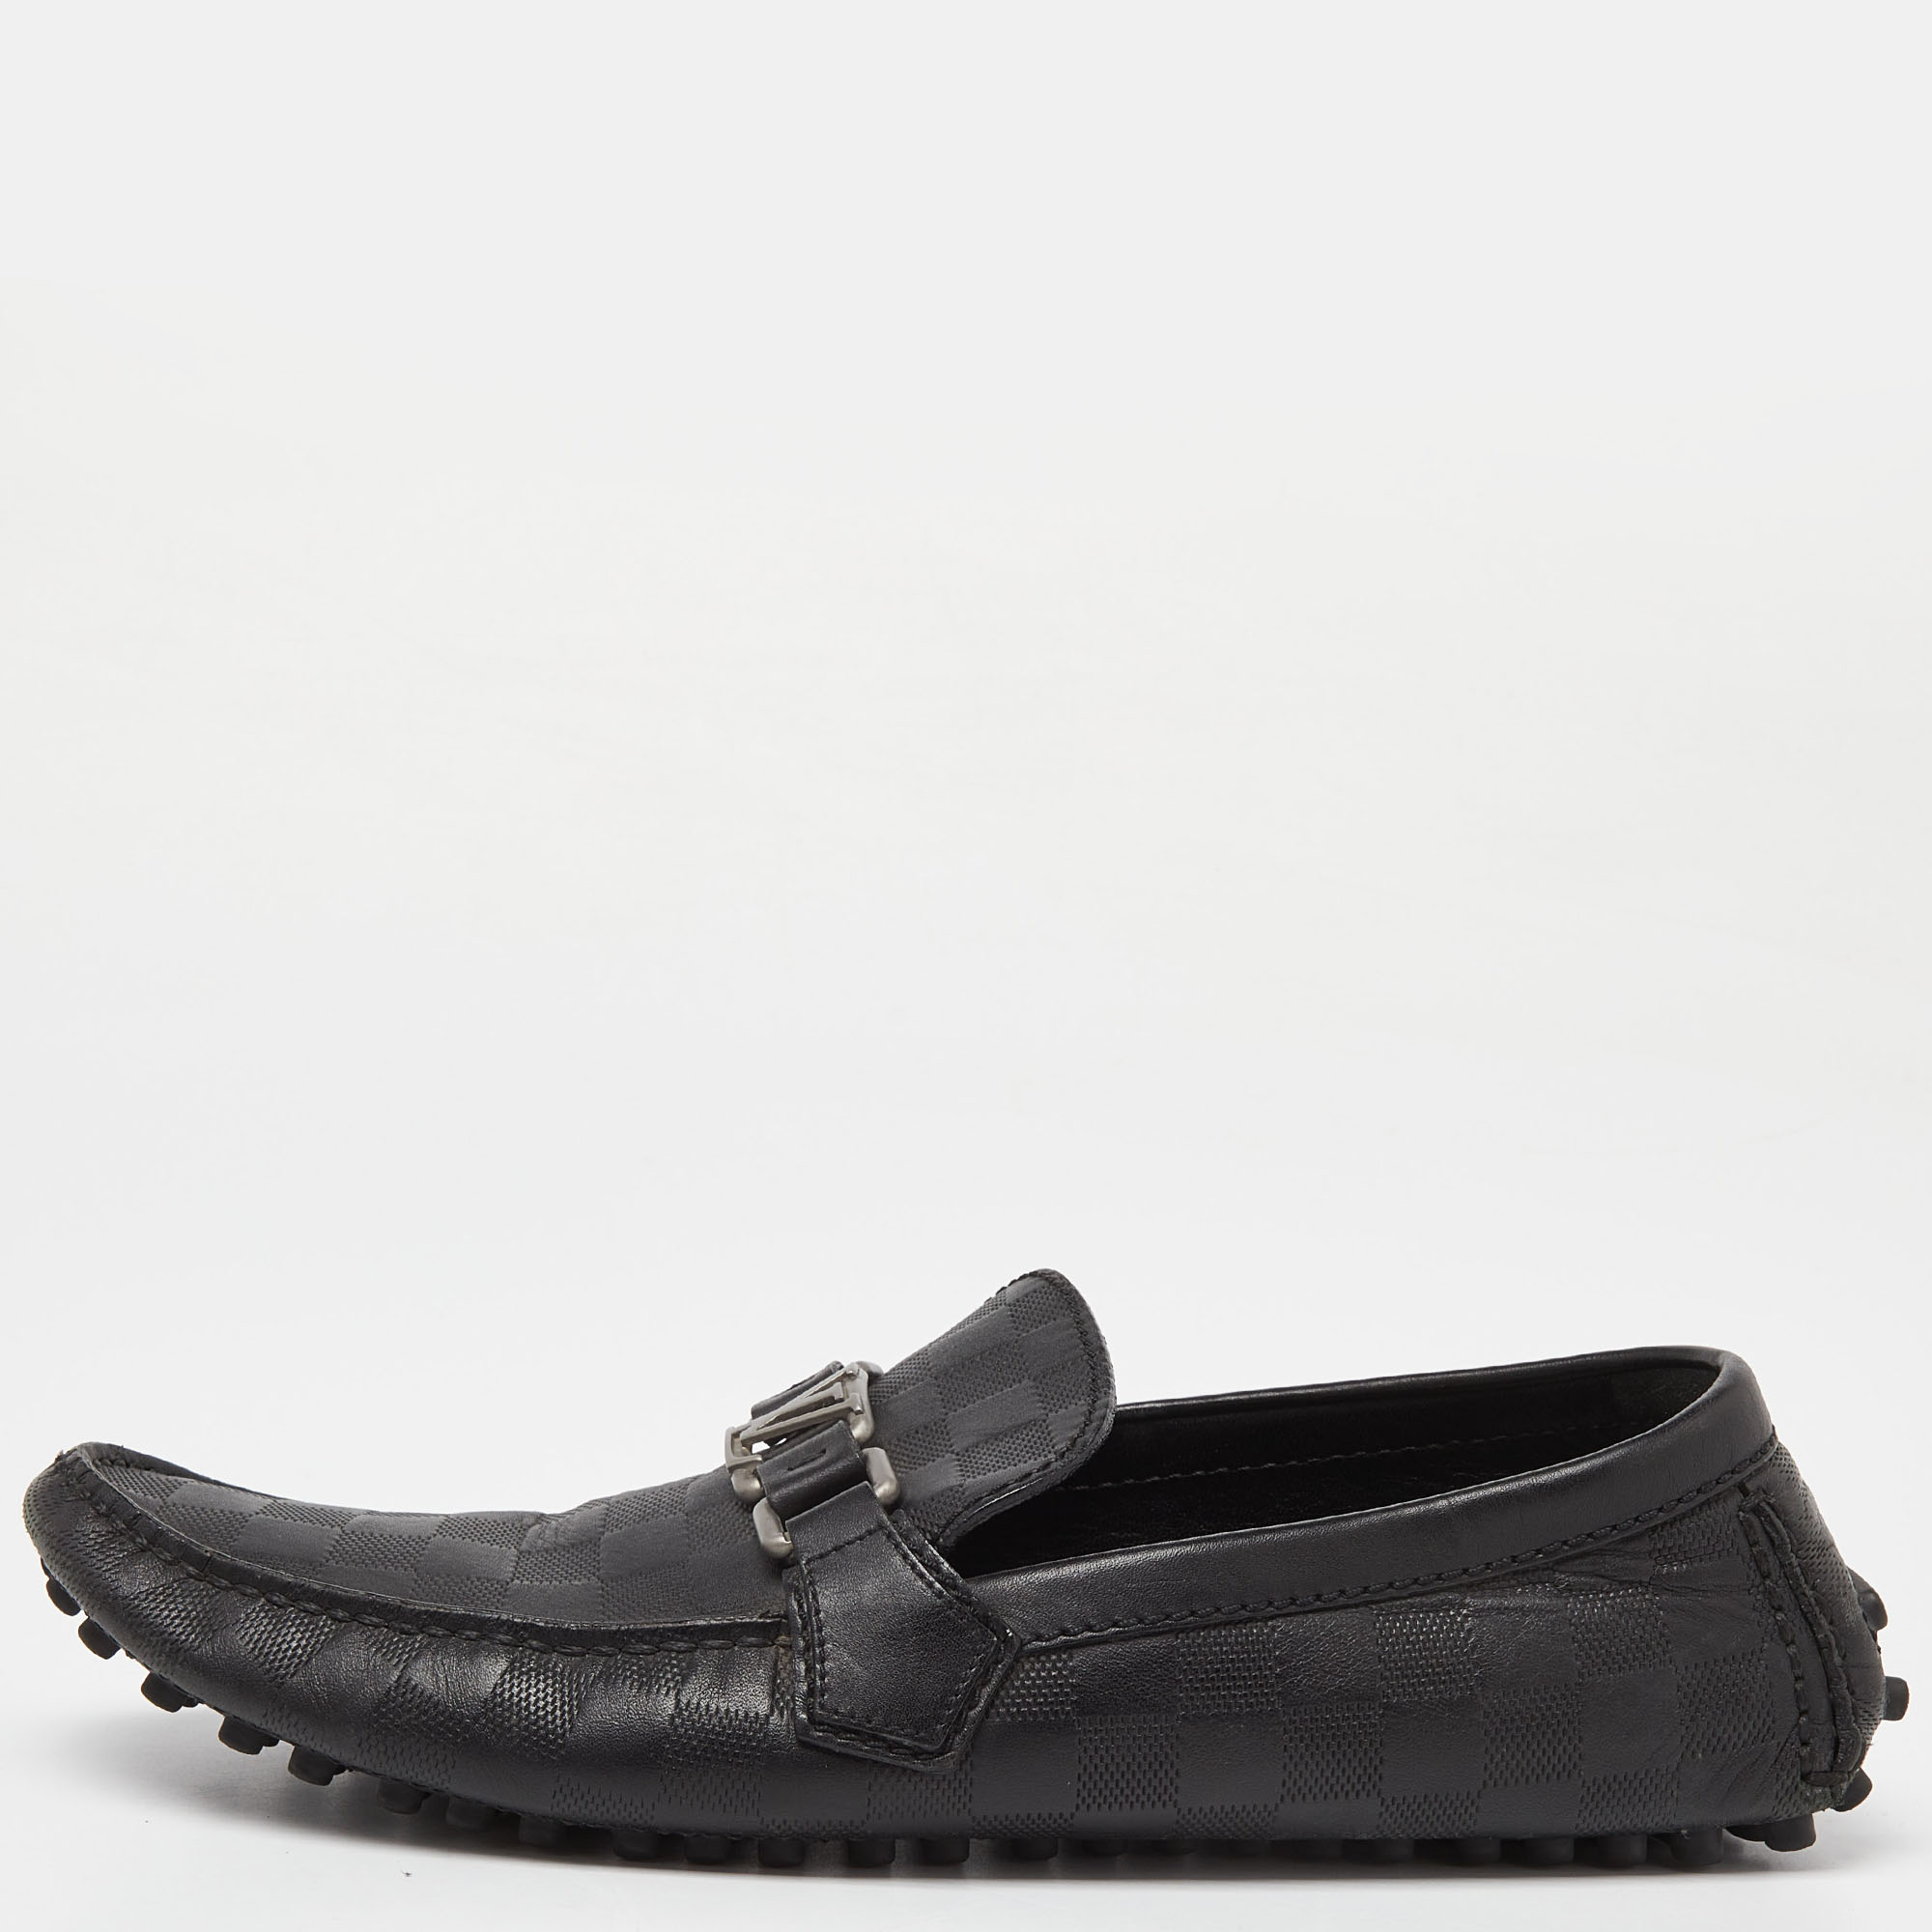 Pre-owned Louis Vuitton Black Leather Hockenheim Slip On Loafers Size 42.5